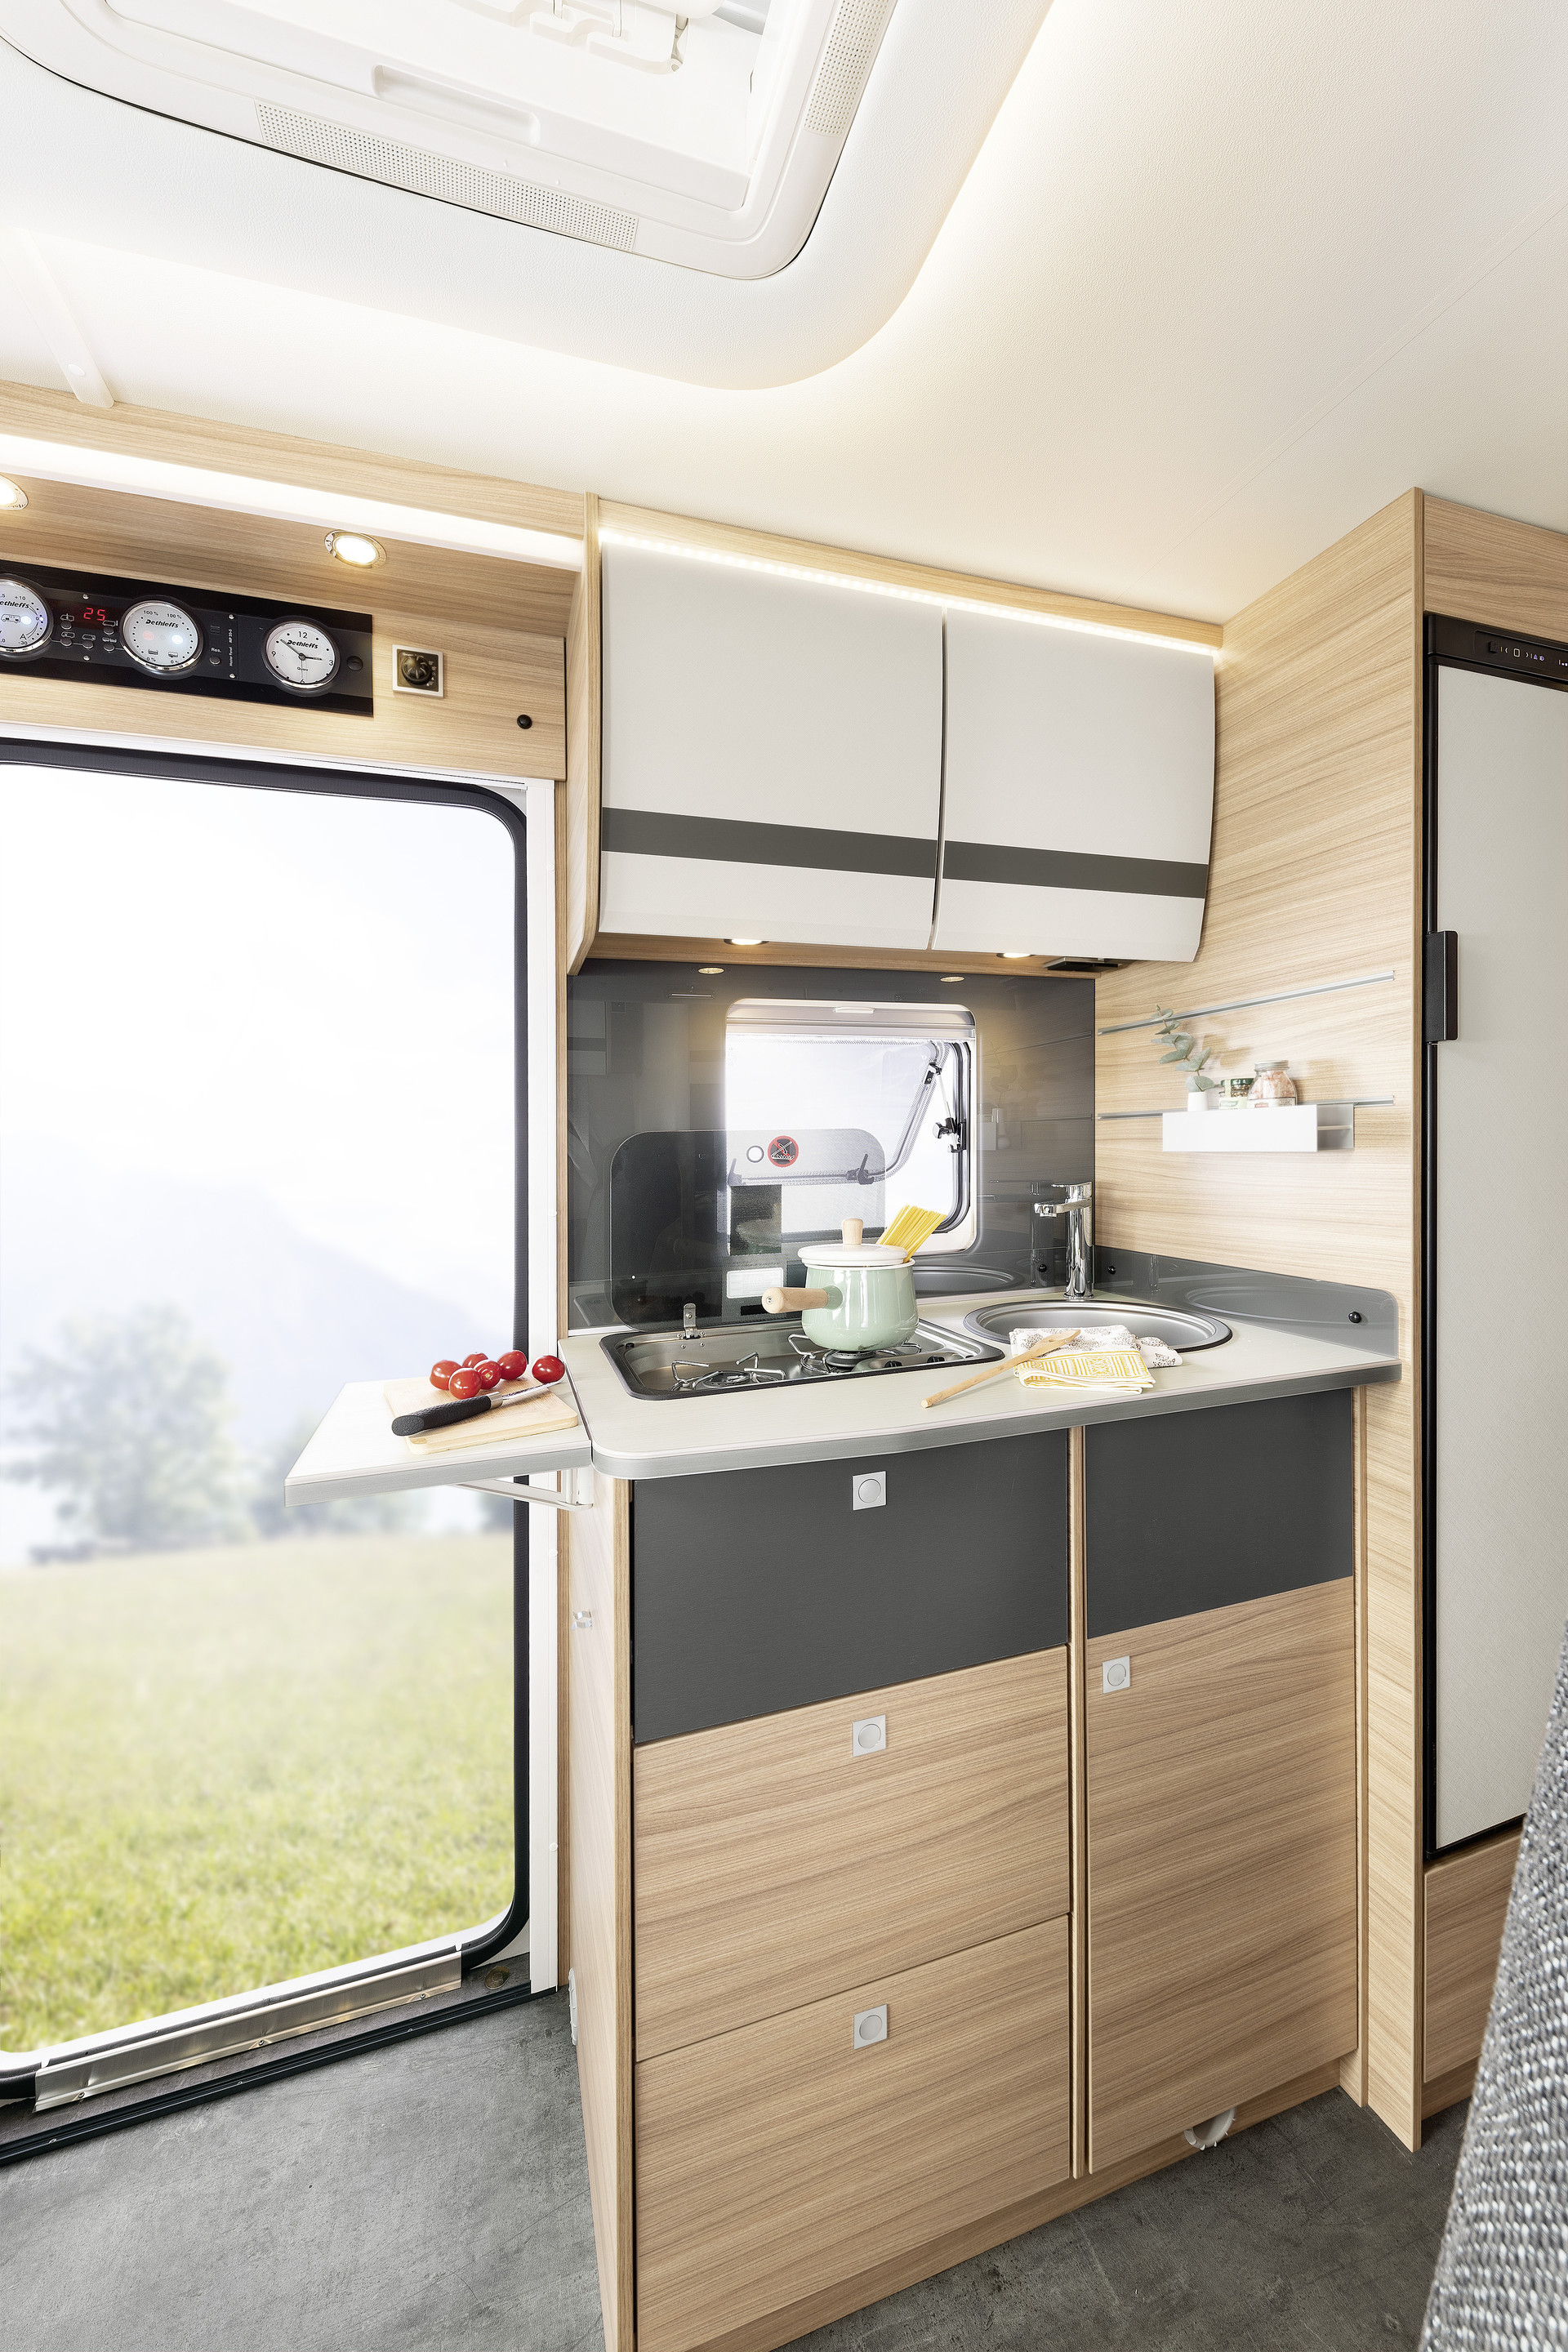 Compact, yet packed everything you need – fully equipped kitchen with hot-water system, gas cooker, oven with grill Duplex, large drawers and fridge • T/I 6